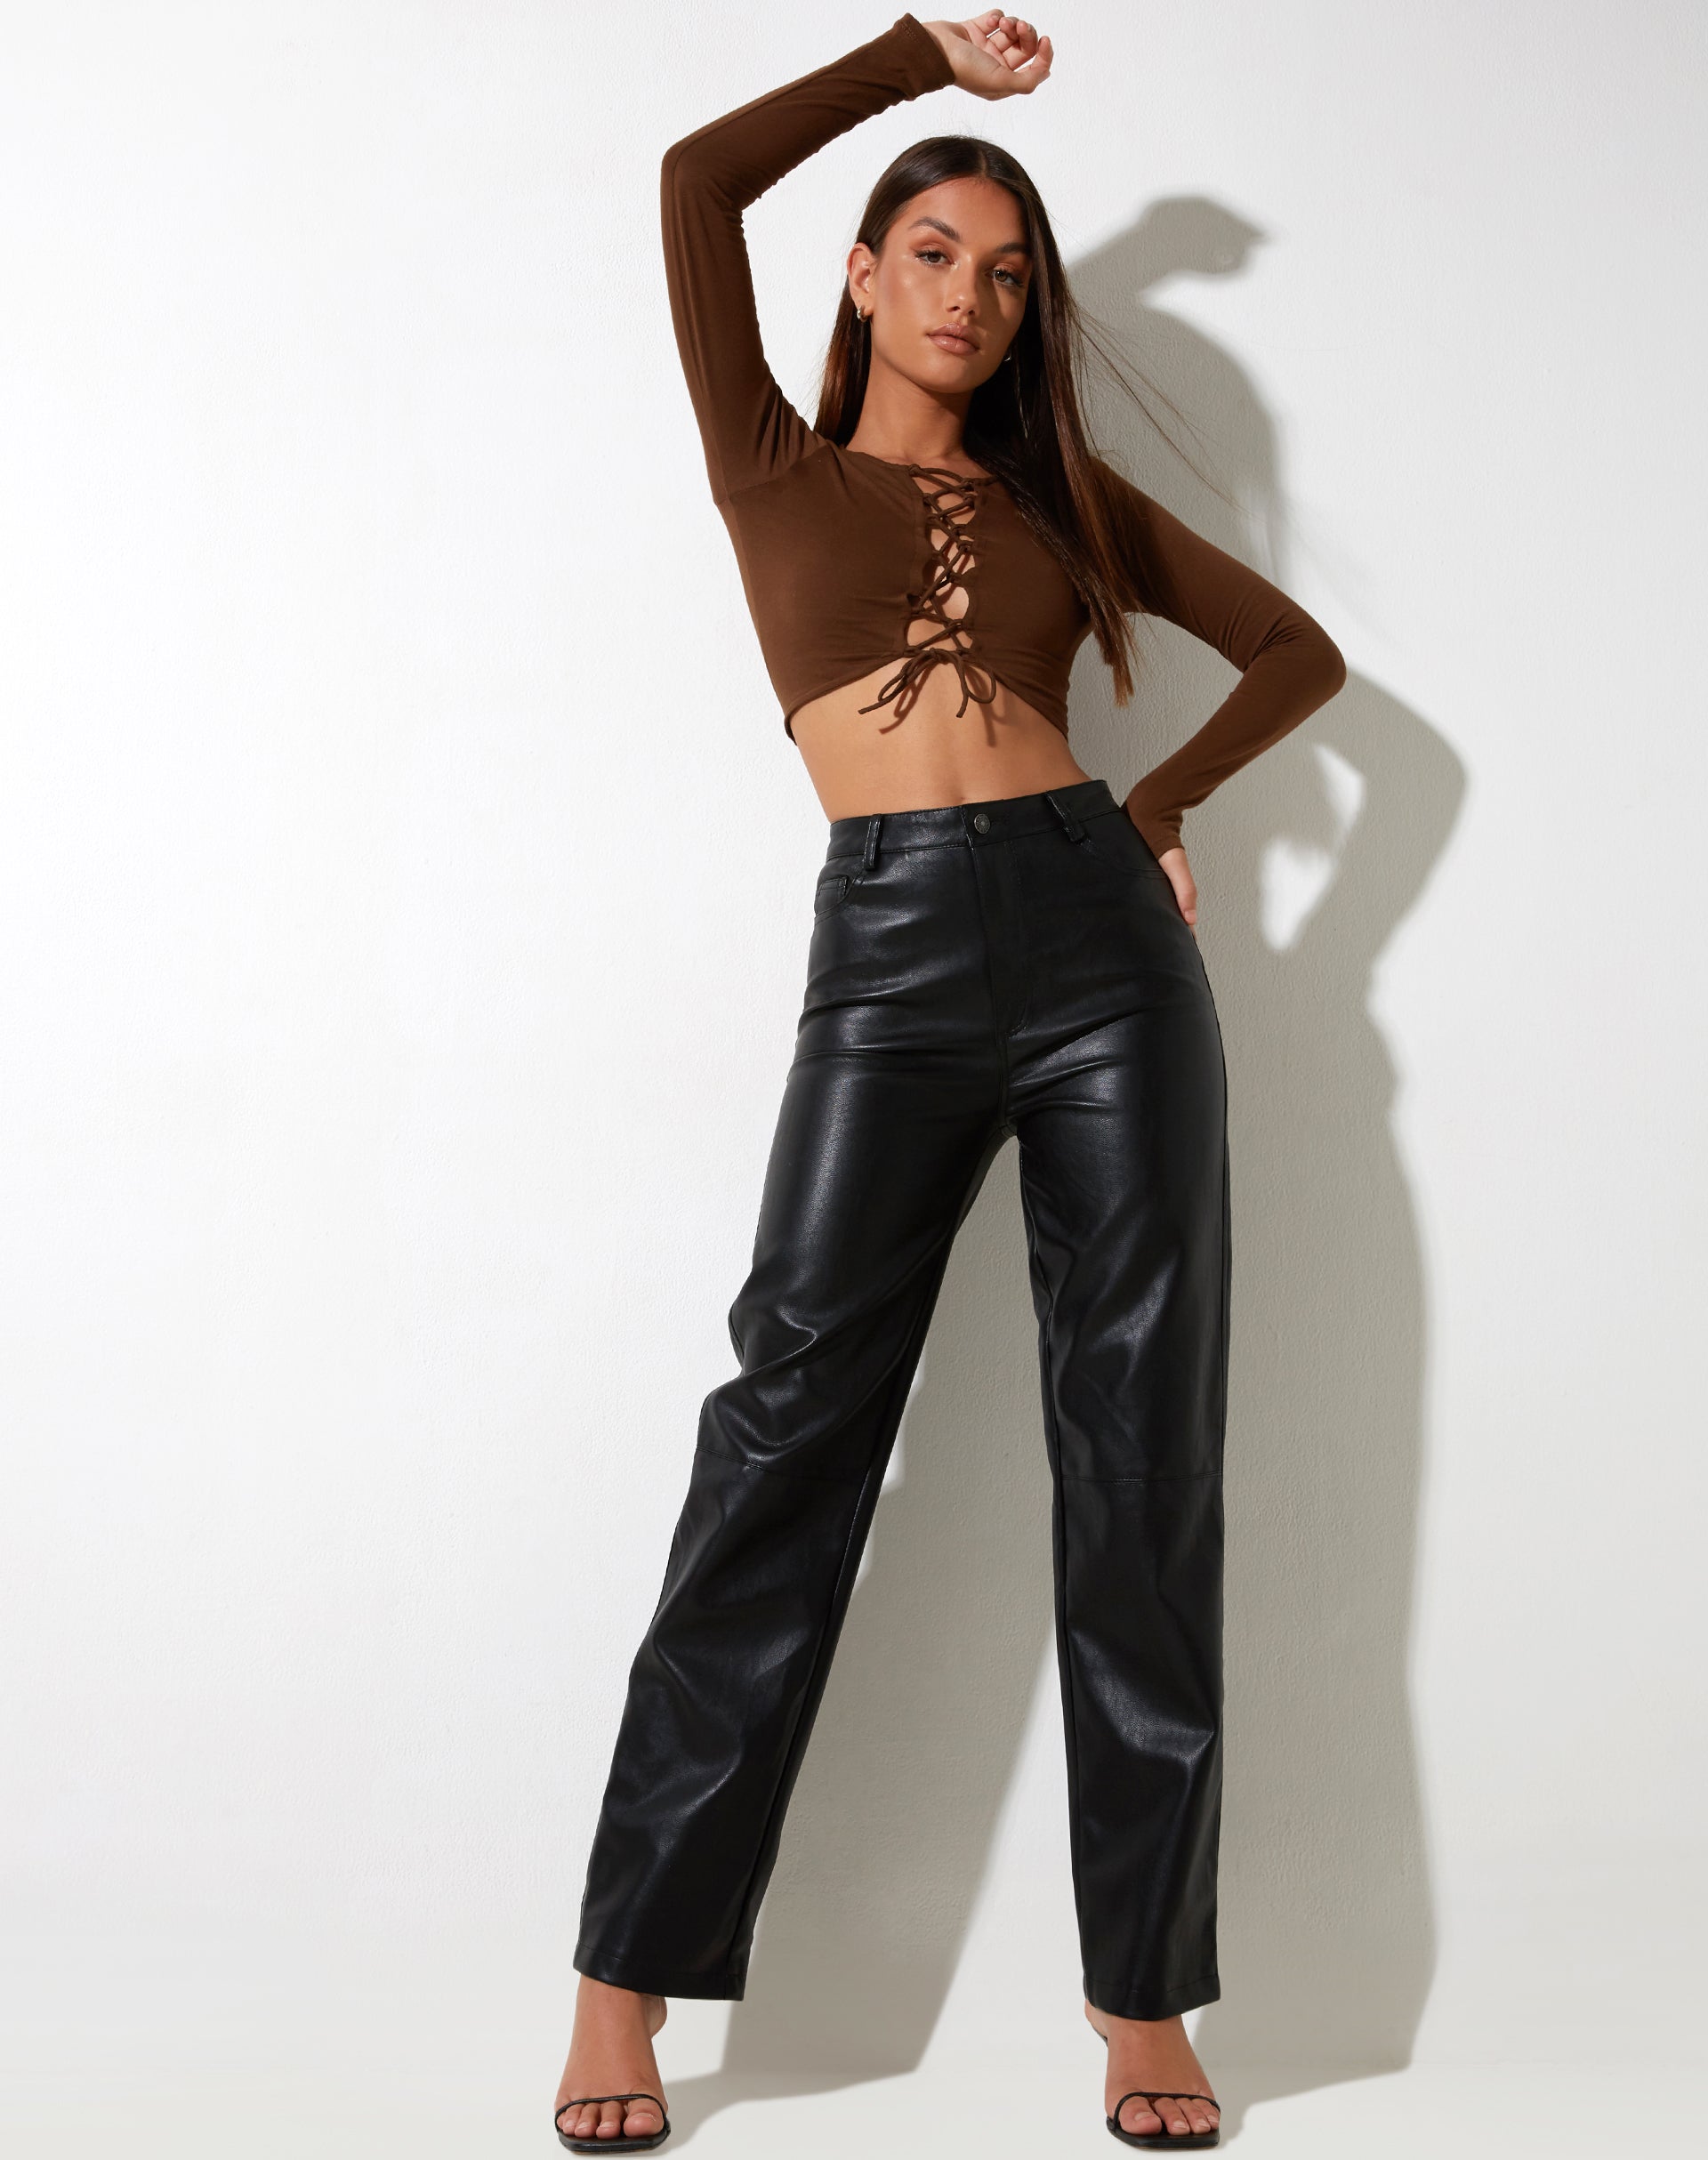 Gisy Crop Top in Cocoa Brown